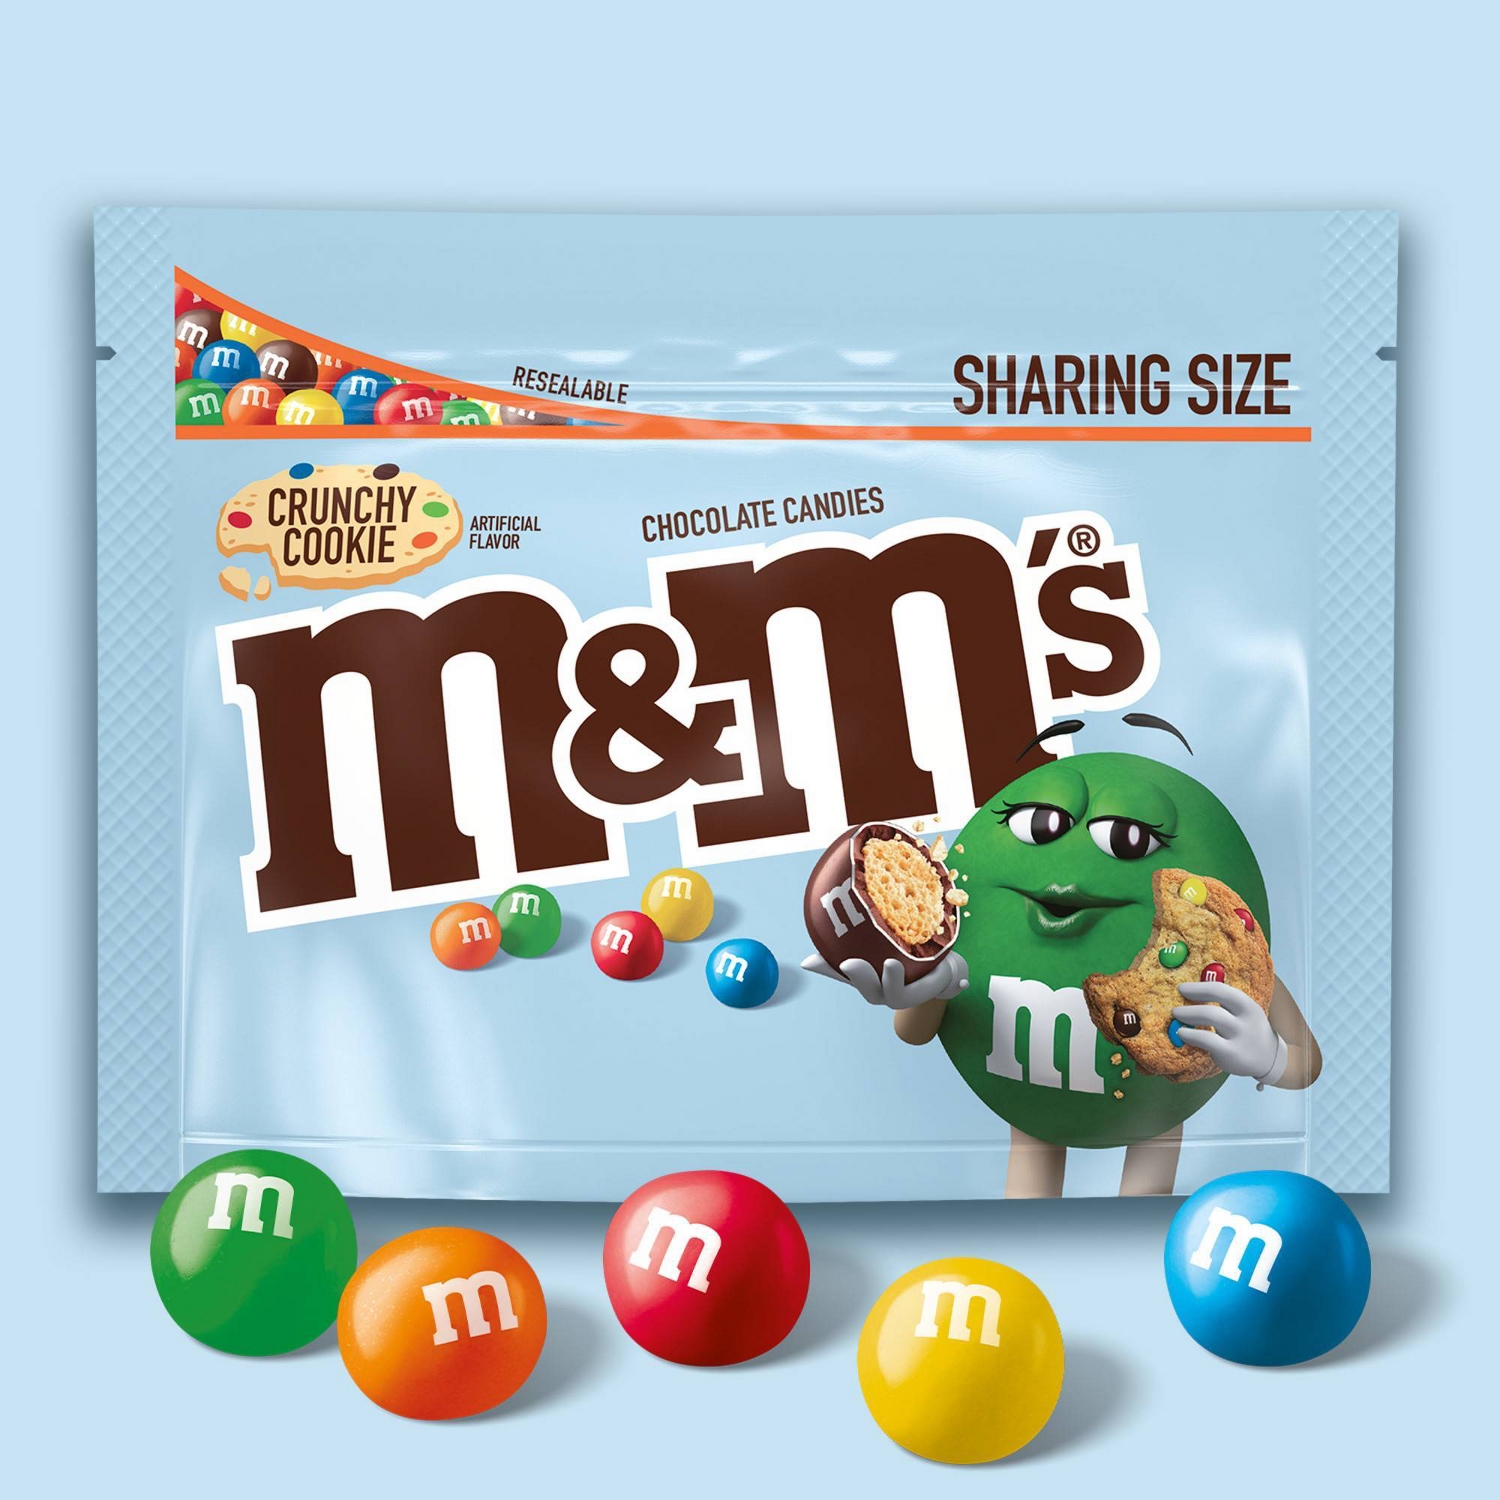 M&Ms Crunchy Cookie Milk Chocolate Candy, Sharing Size – 7.4oz $2.79